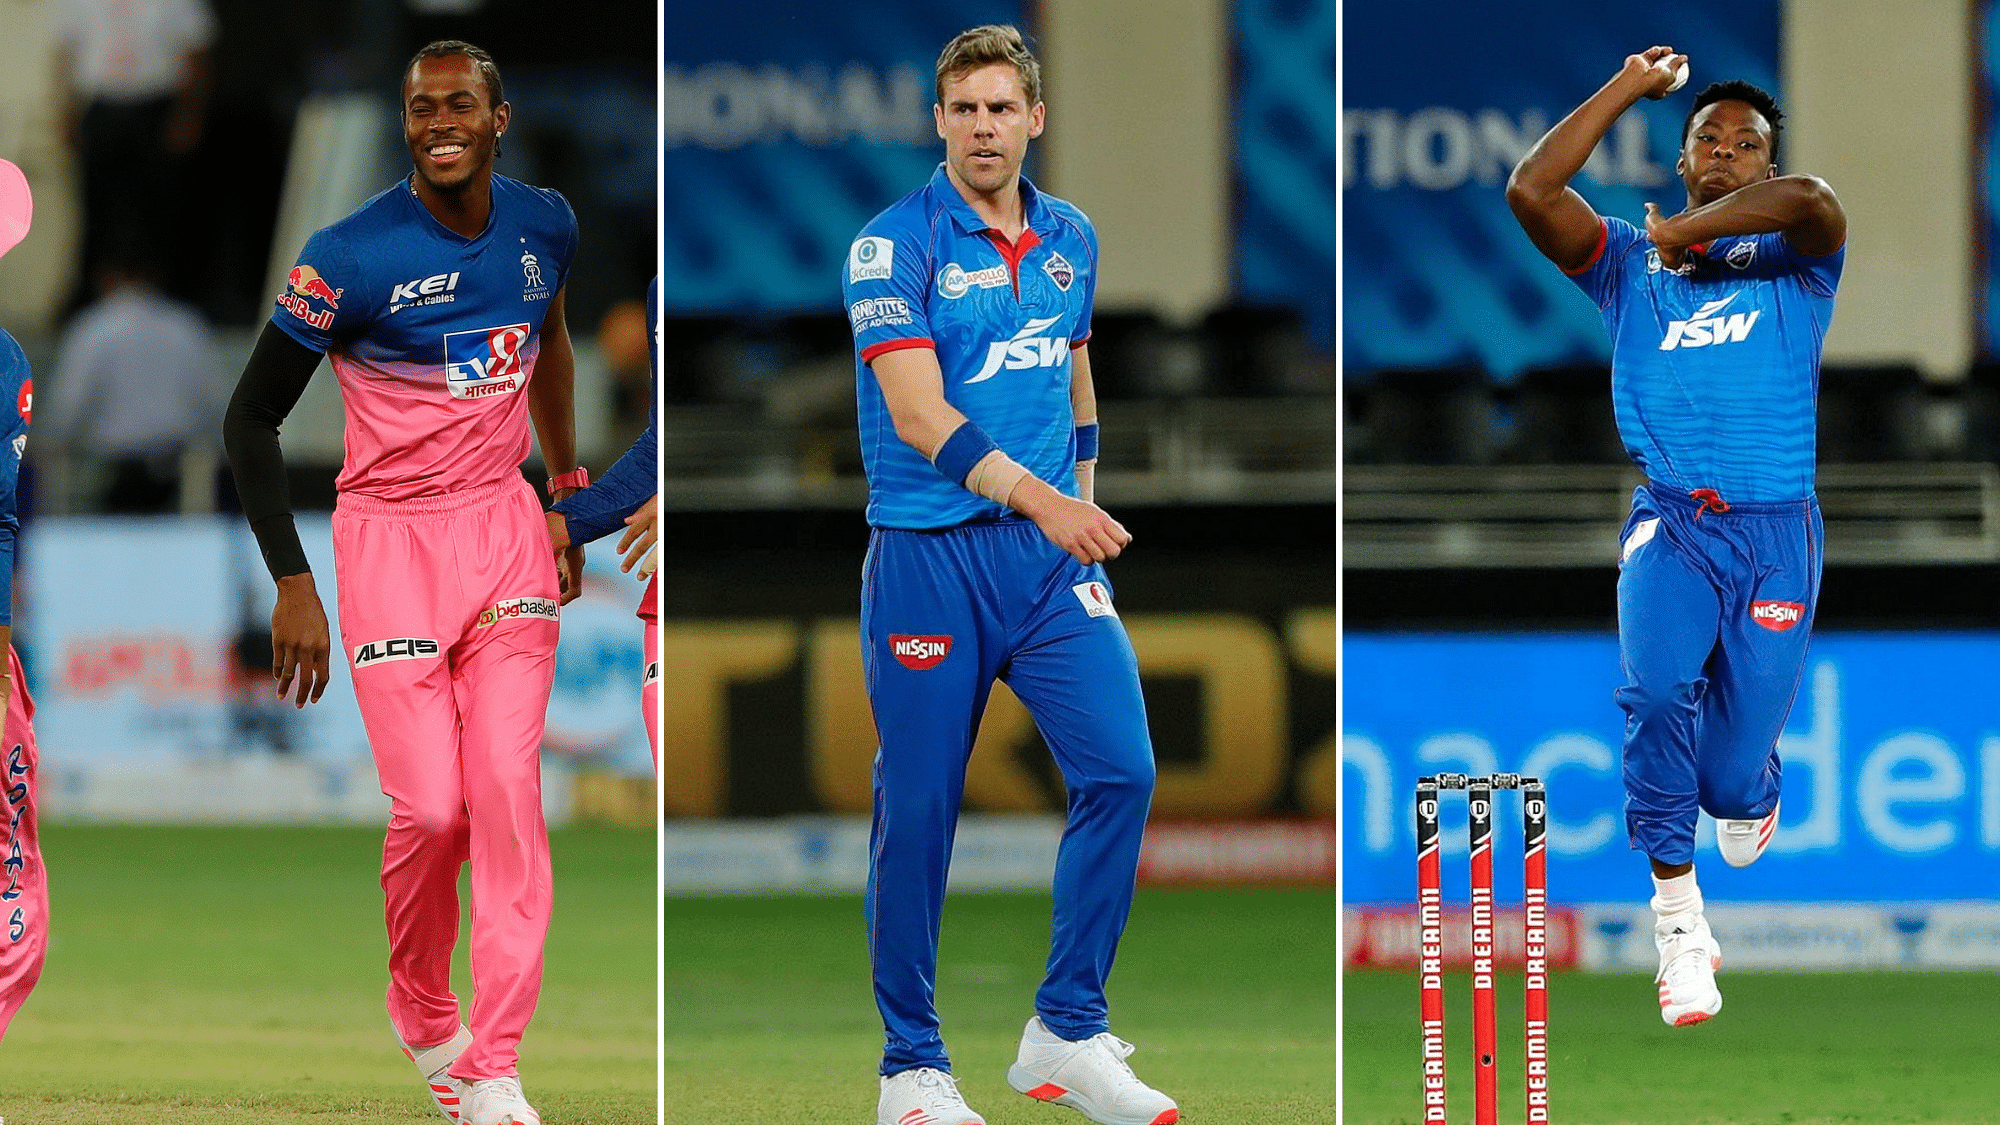 Jofra Archer, Anrich Nortje and Kagiso Rabada displayed serious fast bowling on Wednesday troubling the opposition batsmen.